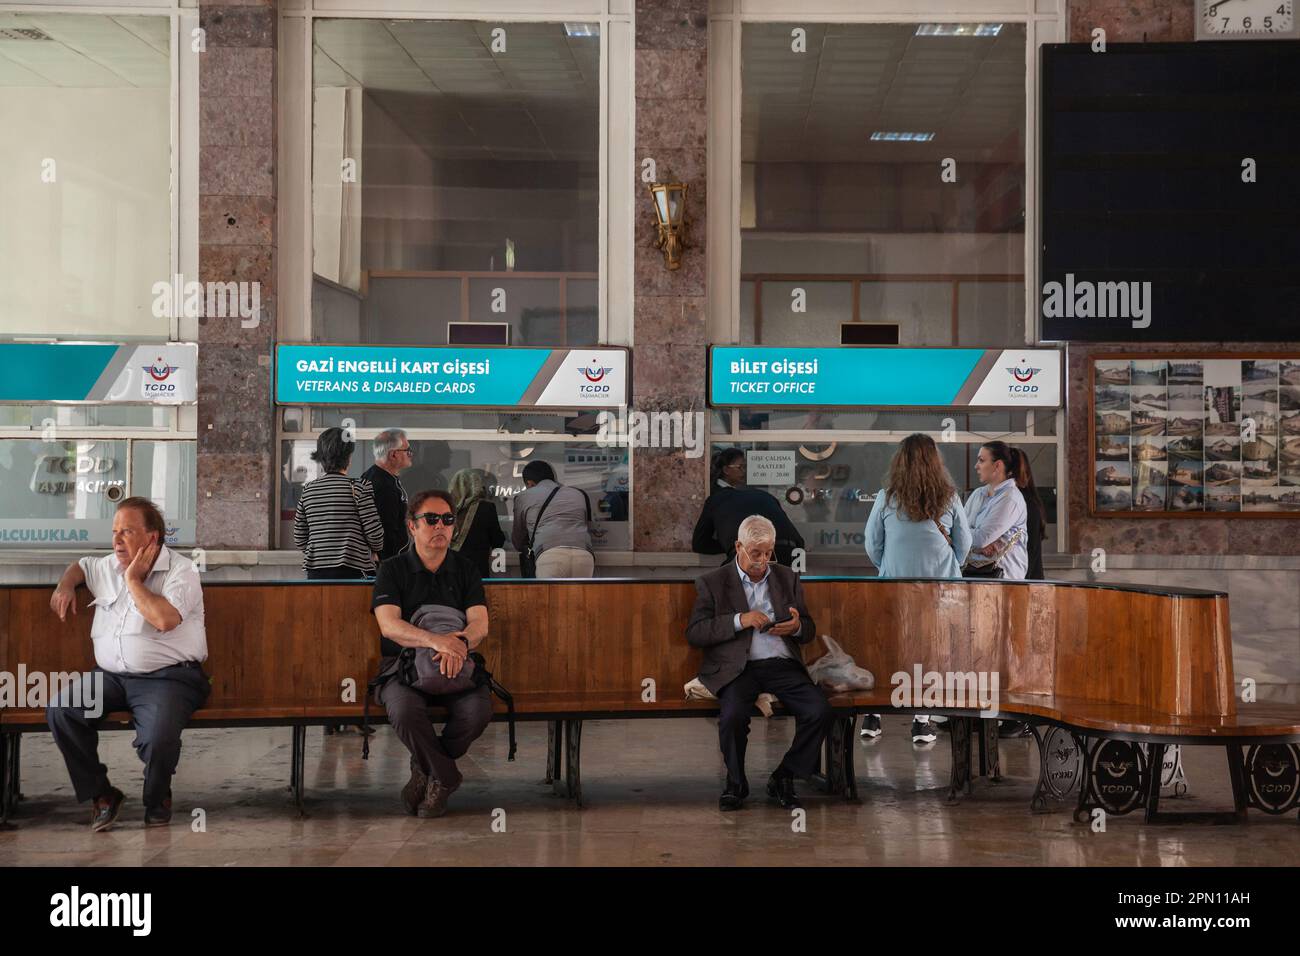 Picture of the main waiting room of the istanbul sirkeci train station. Sirkeci railway station, listed on maps as Istanbul railway station, is a rail Stock Photo